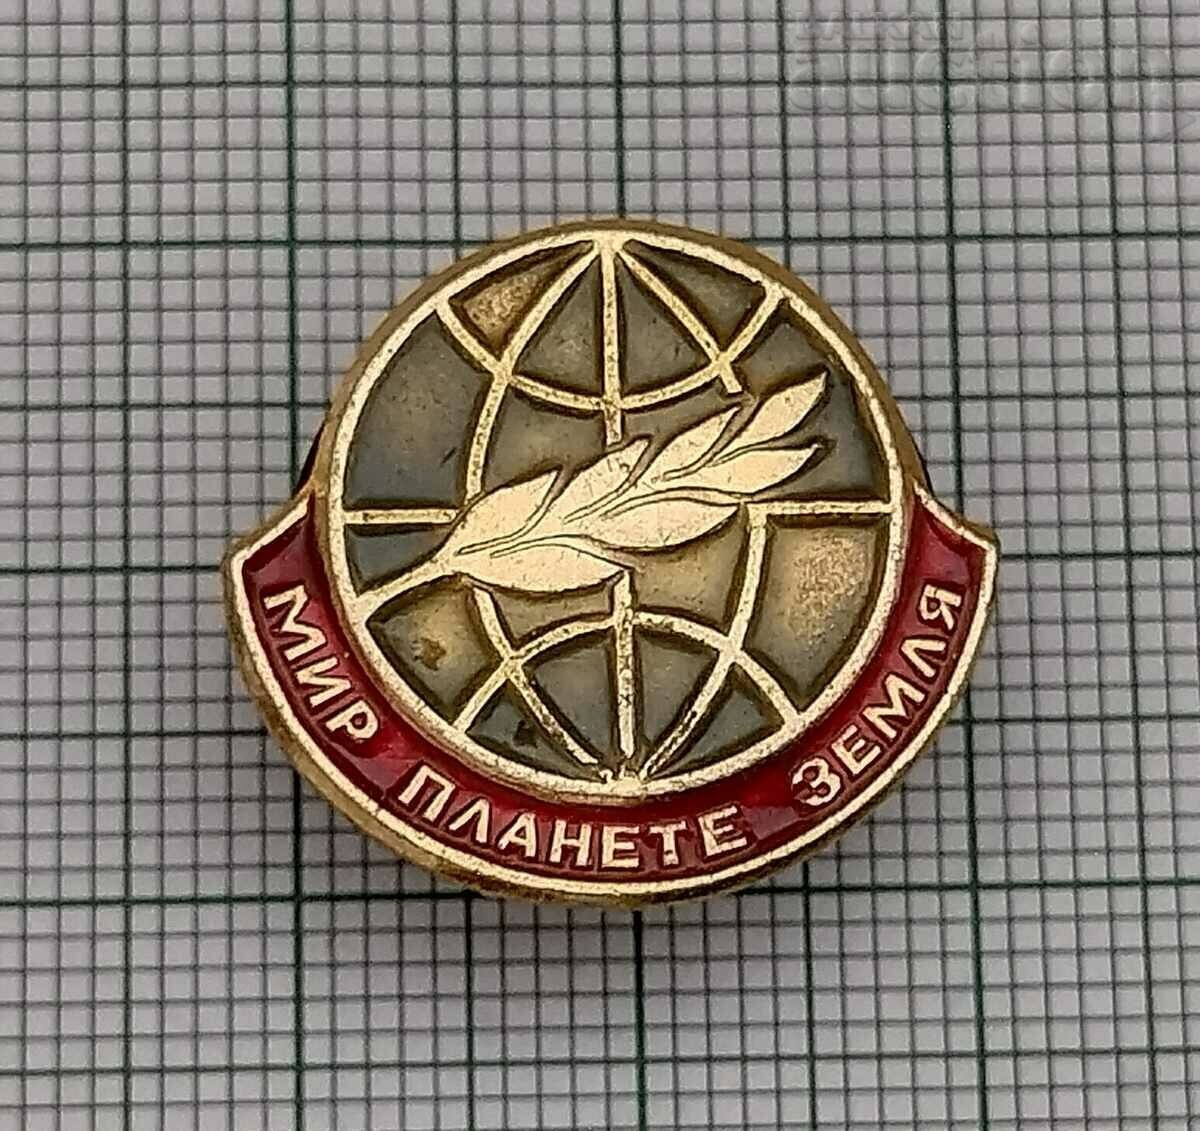 PEACE FOR PLANET EARTH USSR BADGE